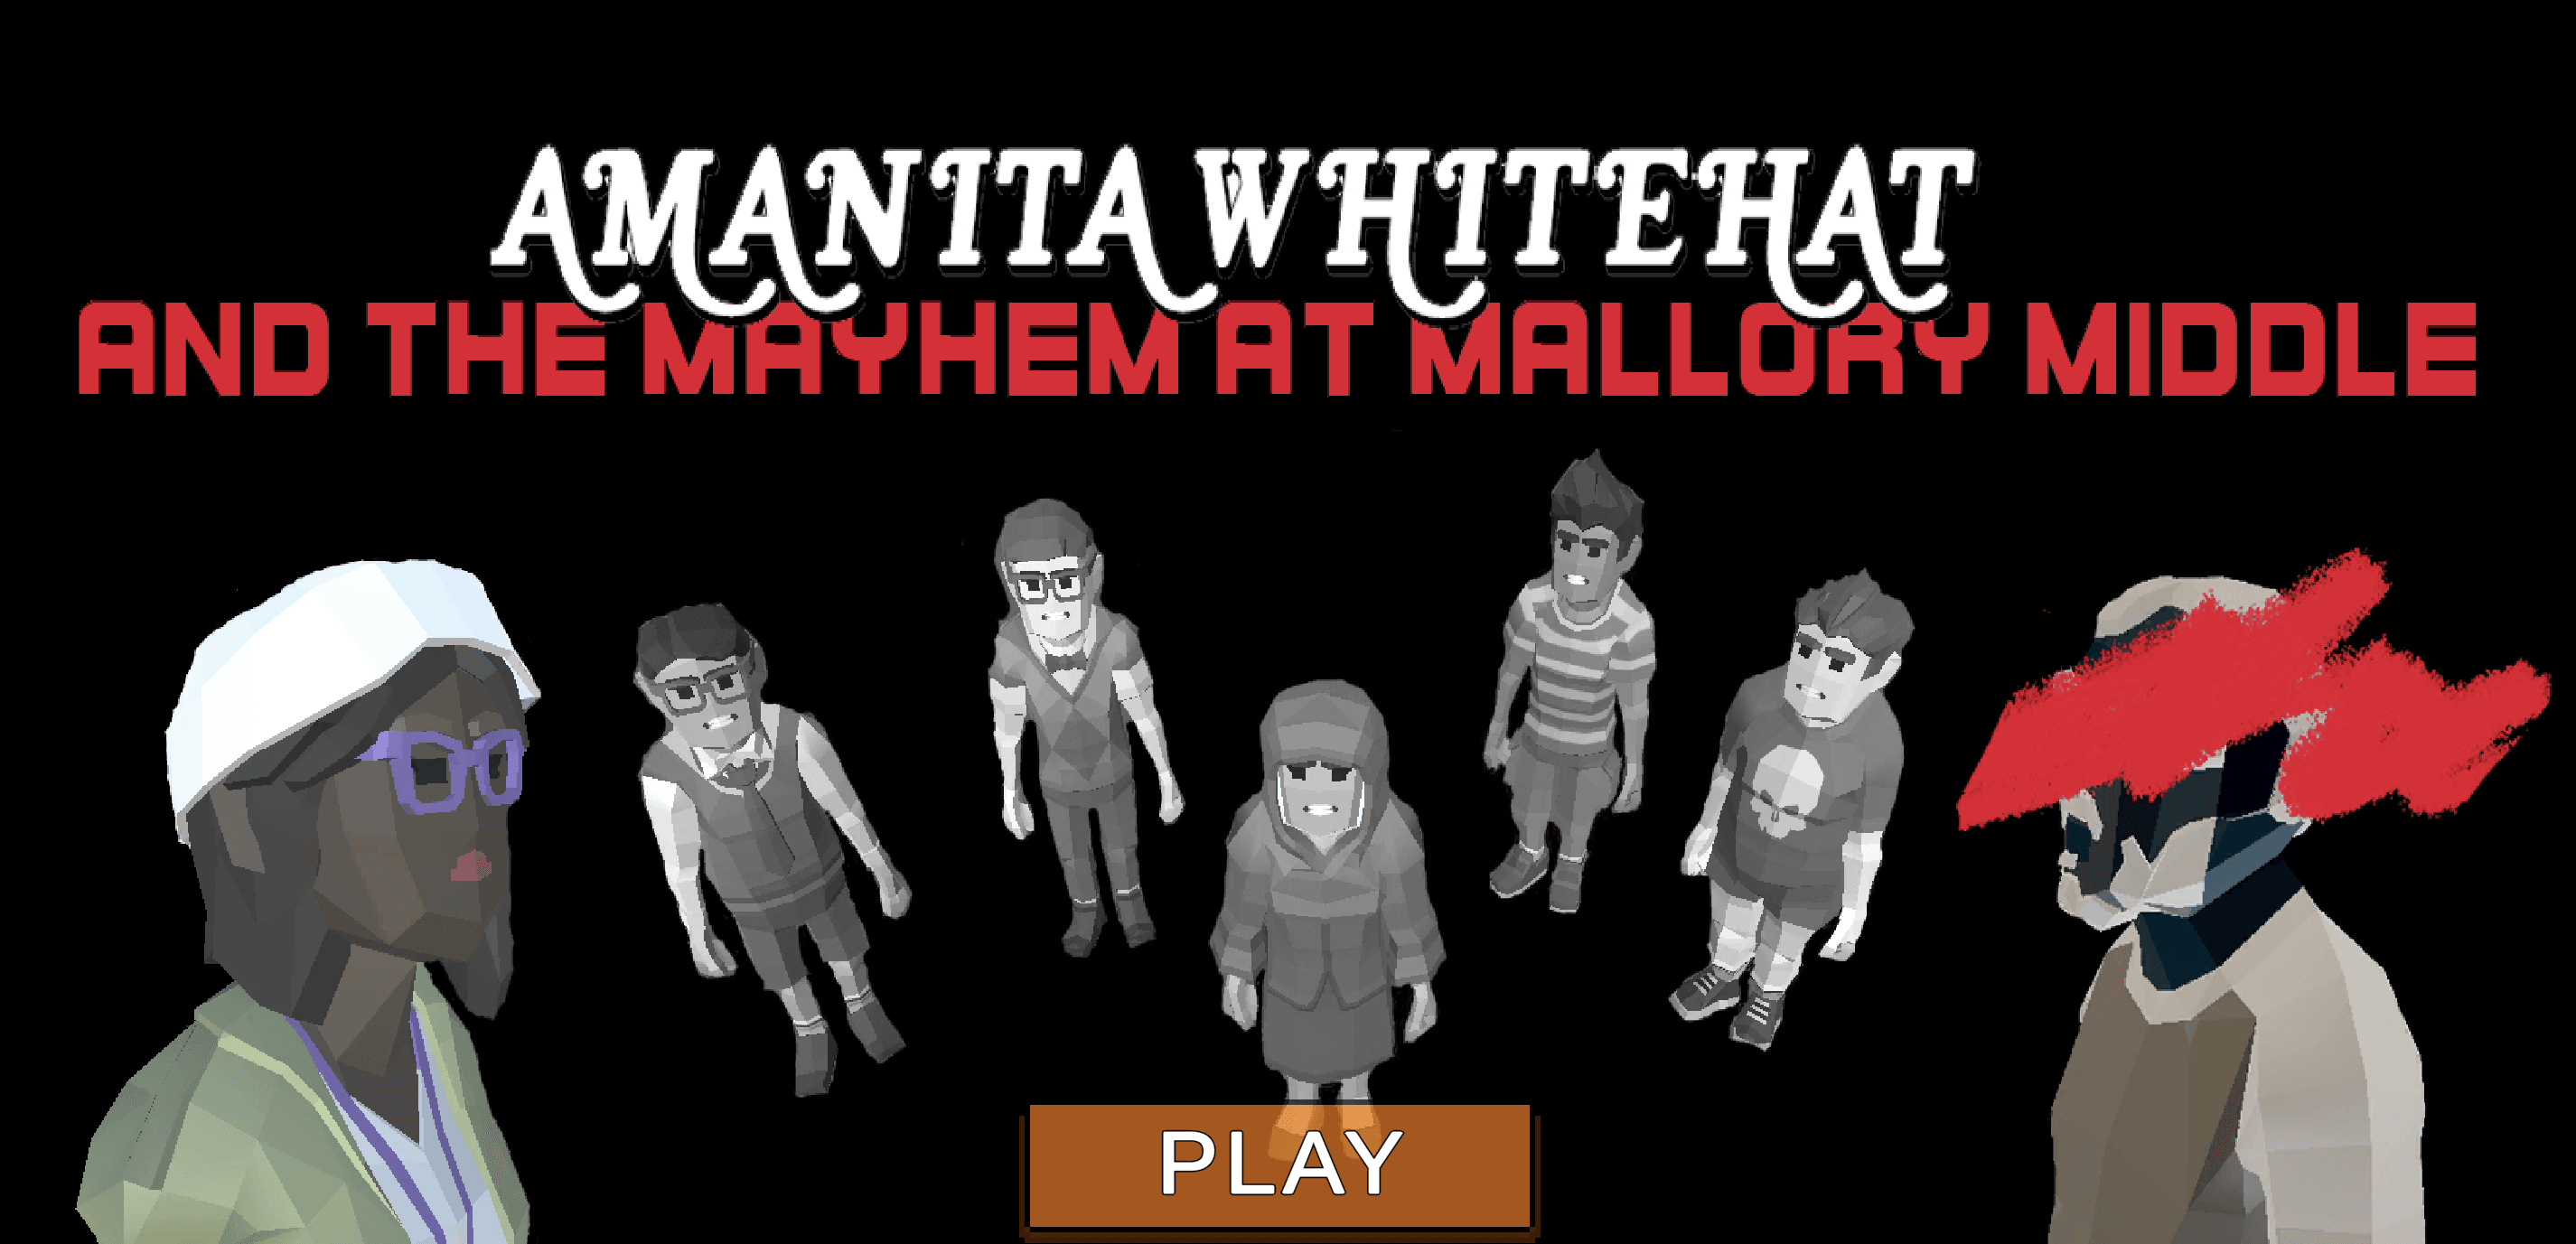 The 2nd Amanita Whitehat Game is Here!